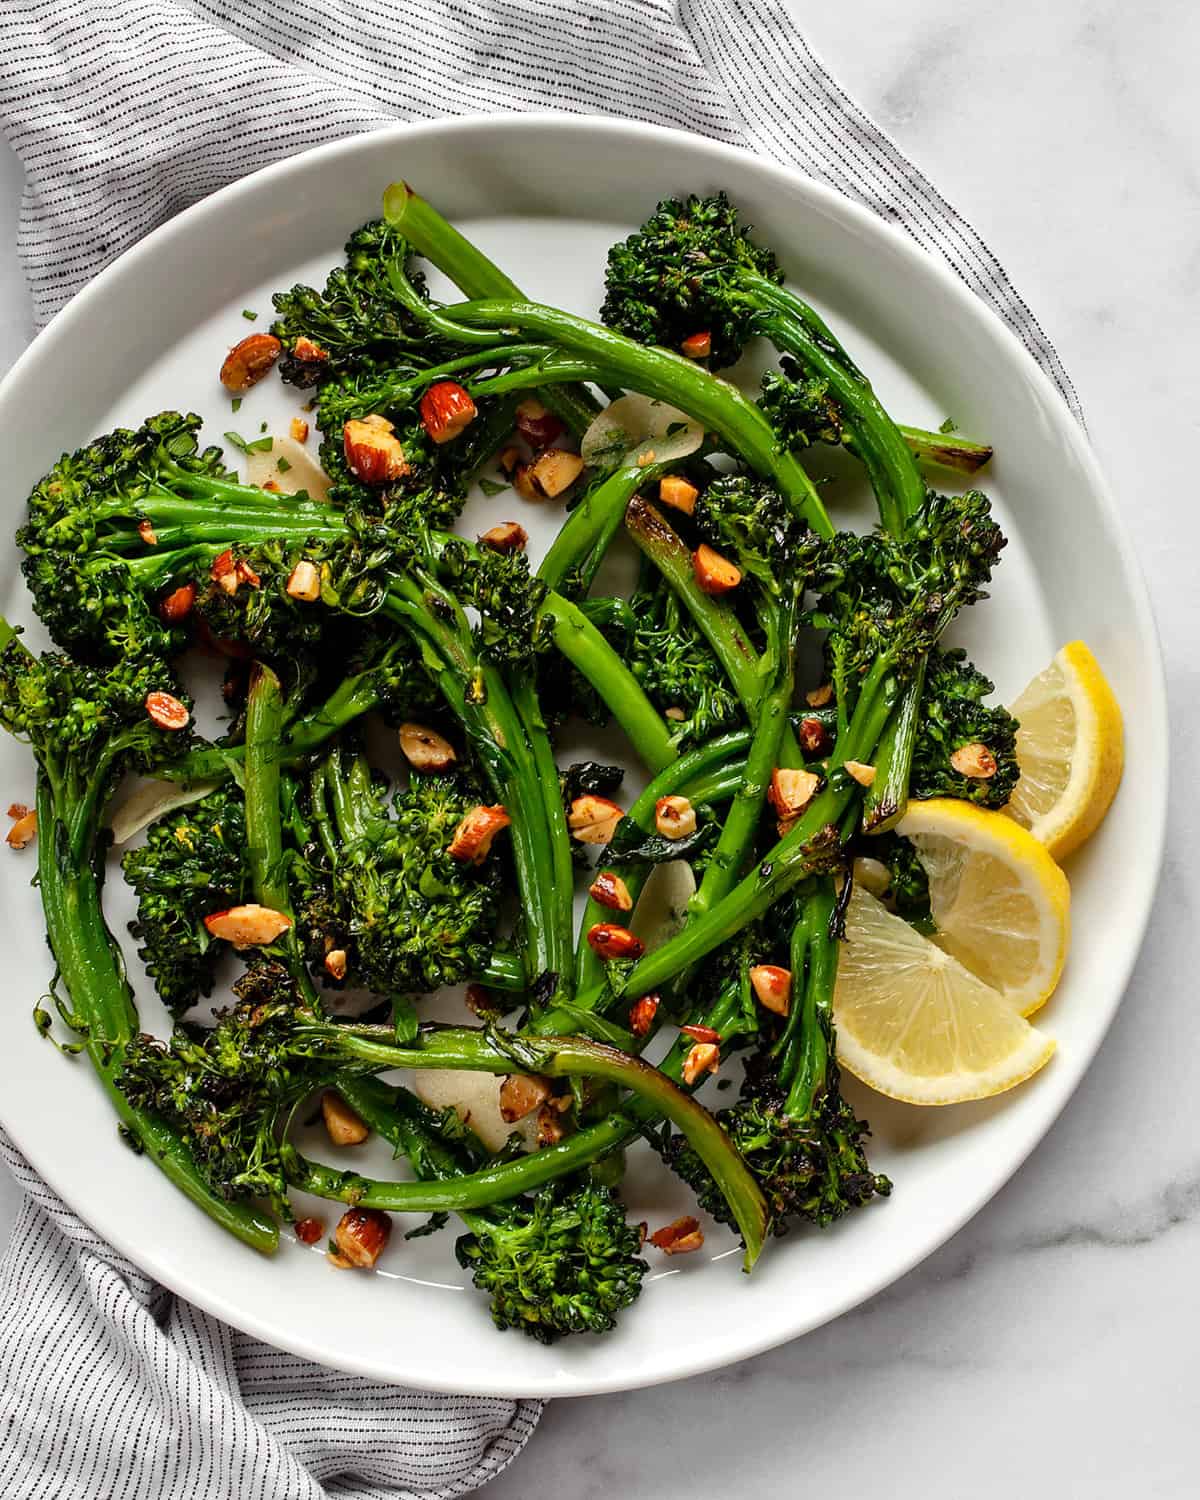 Broccolini piled on a plate with lemon wedges on the side.